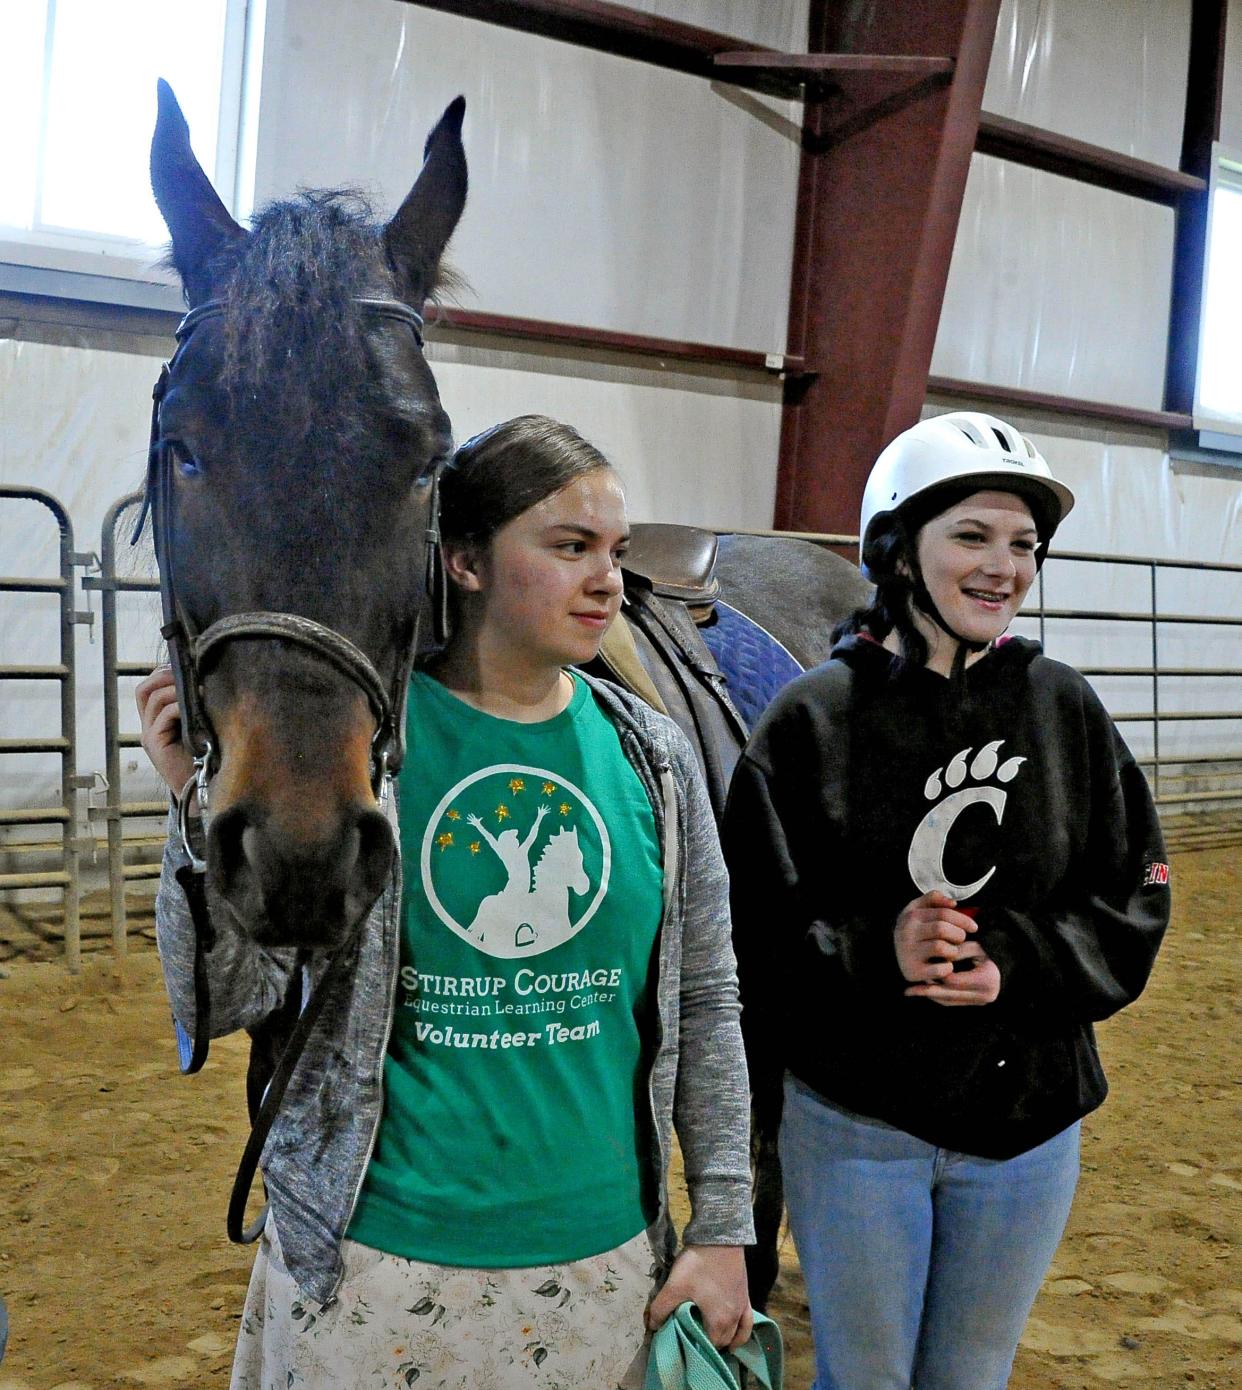 Stirrup Courage volunteer Cherllyn Penrod and client Aubree Vierheller are ready to take a theraputic horse ride.